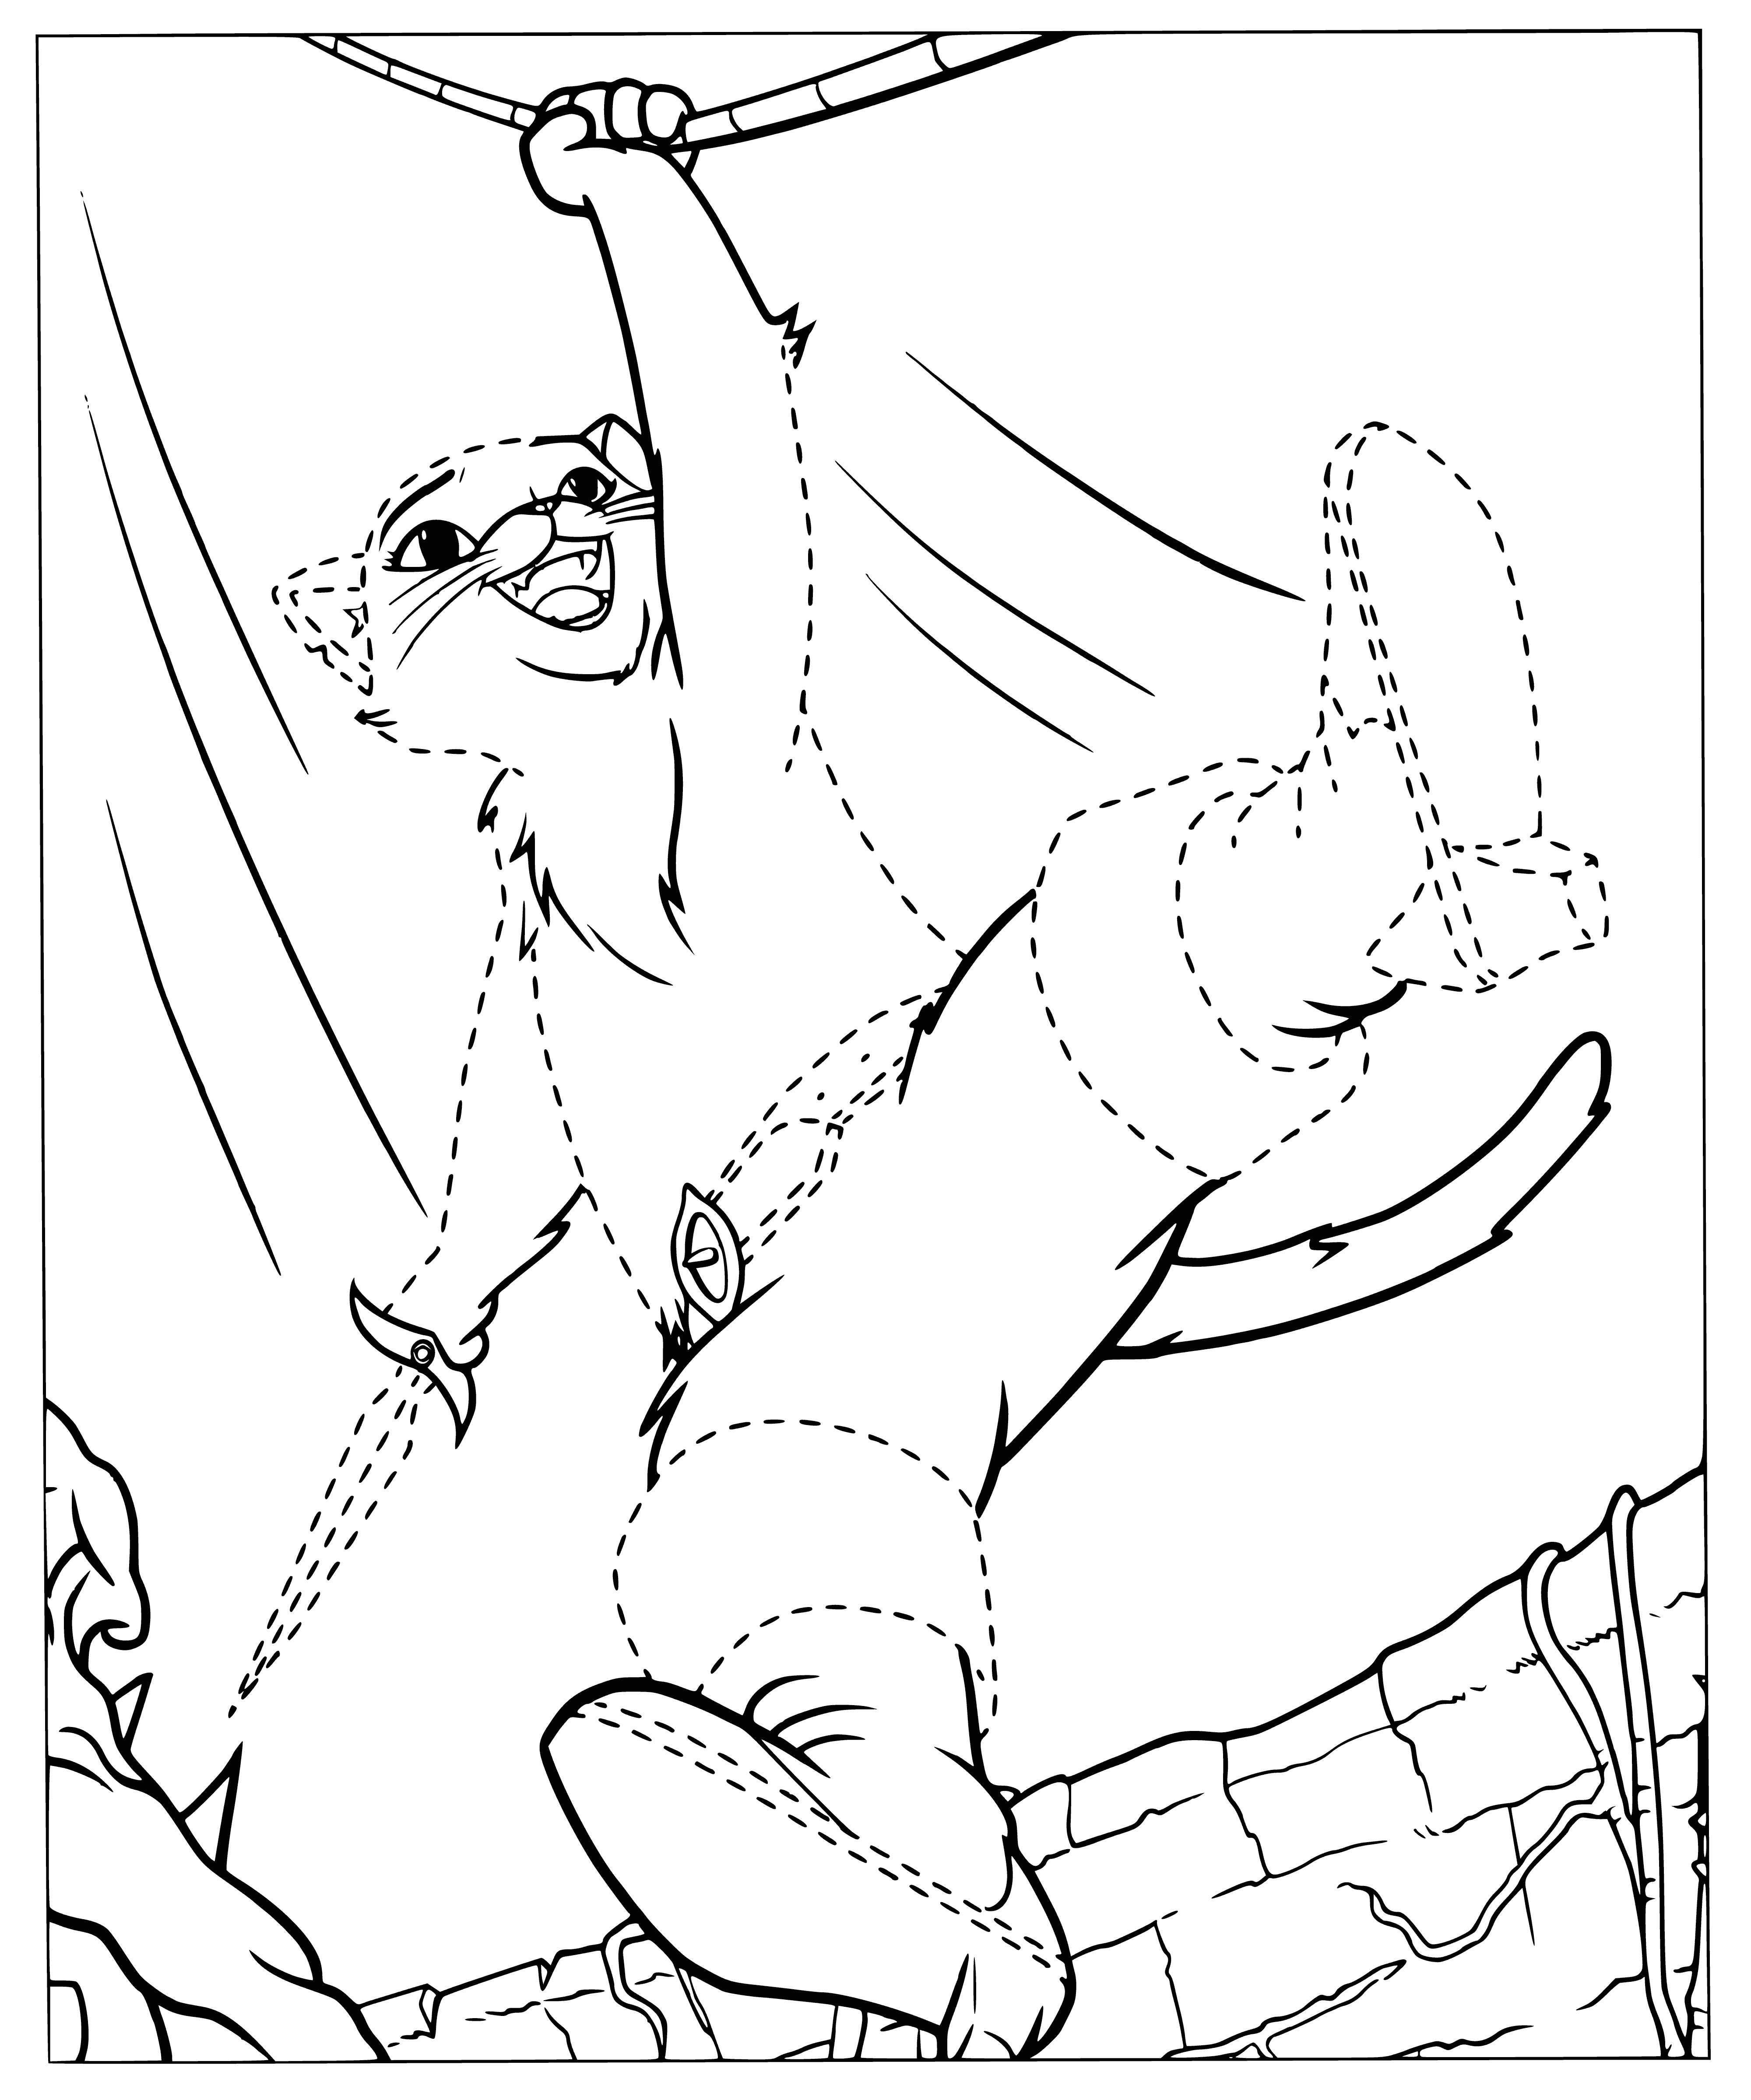 coloring page: Puss in Boots: A brave cat who fights for justice & protects the innocent. A skilled swordsman, loyal & brave, who never shies away from battle.